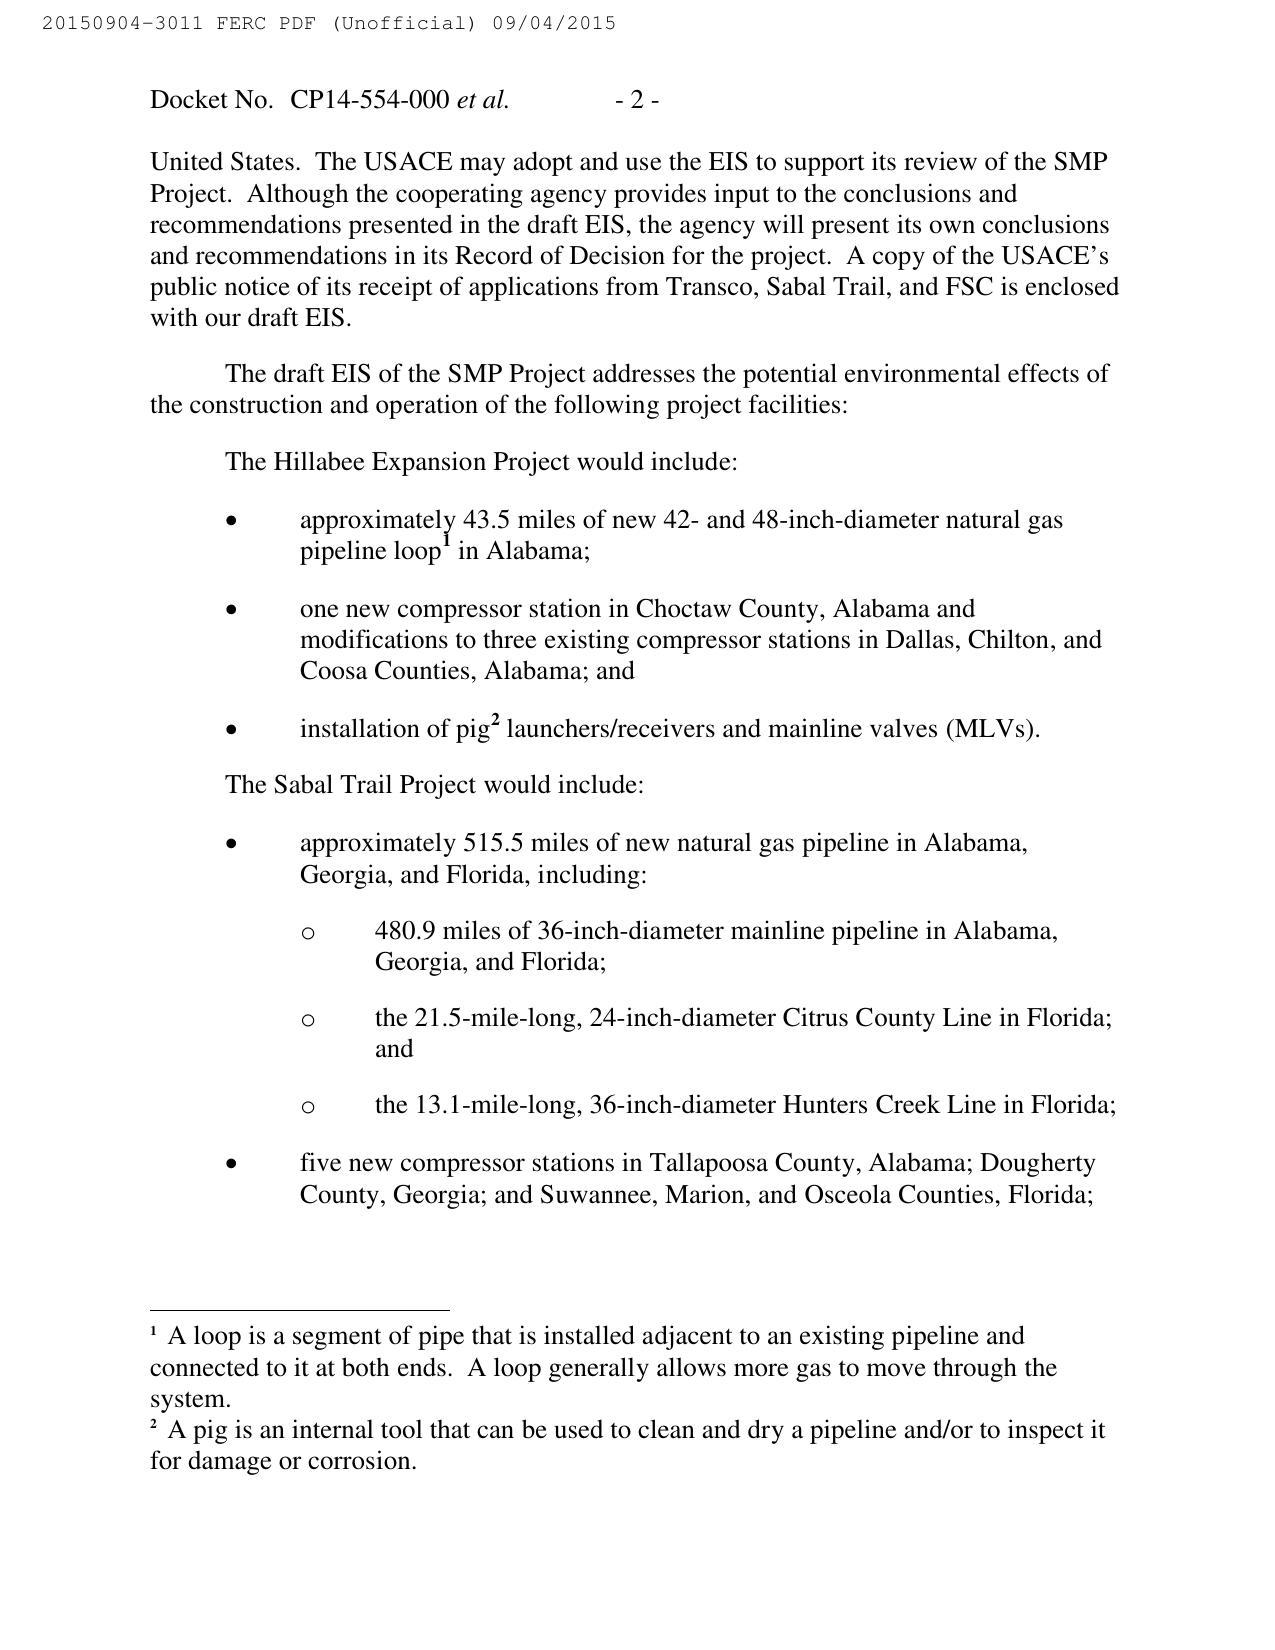 1275x1650 Pipeline facilities, in Notice of Availability of Draft Environmental Impact Statement, by FERC, for SpectraBusters.org, 4 September 2015